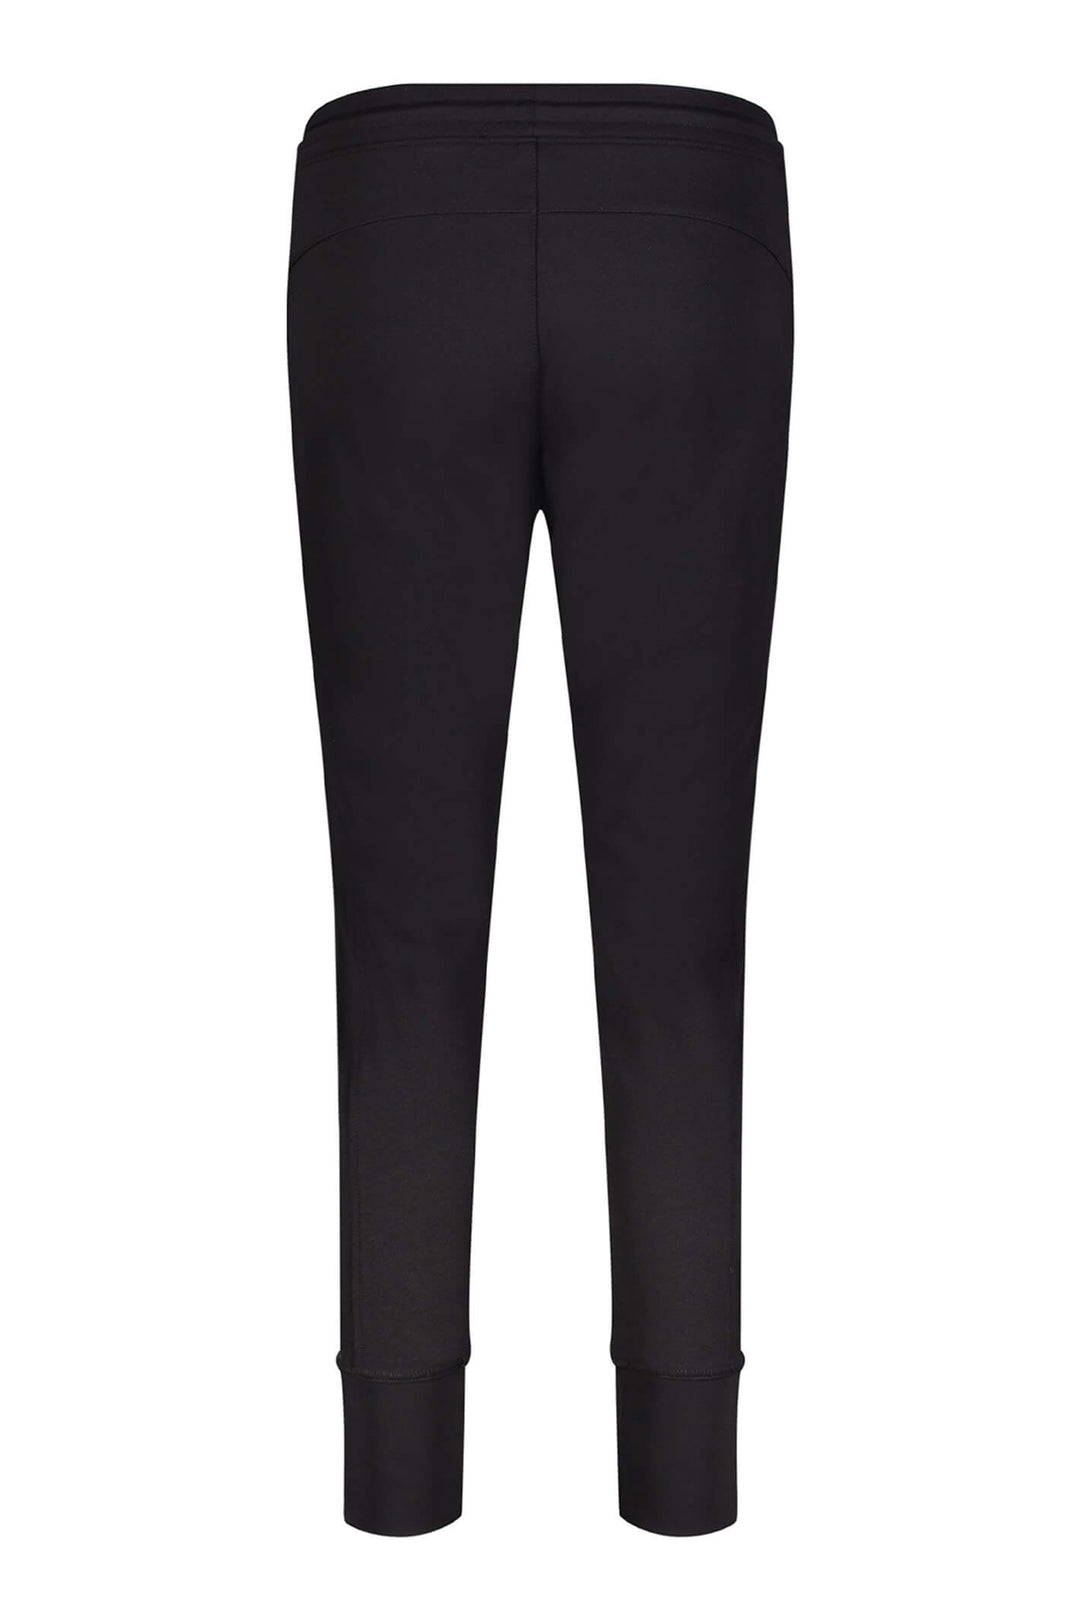 MAC Future Sporty Pull-On Black Trousers Back